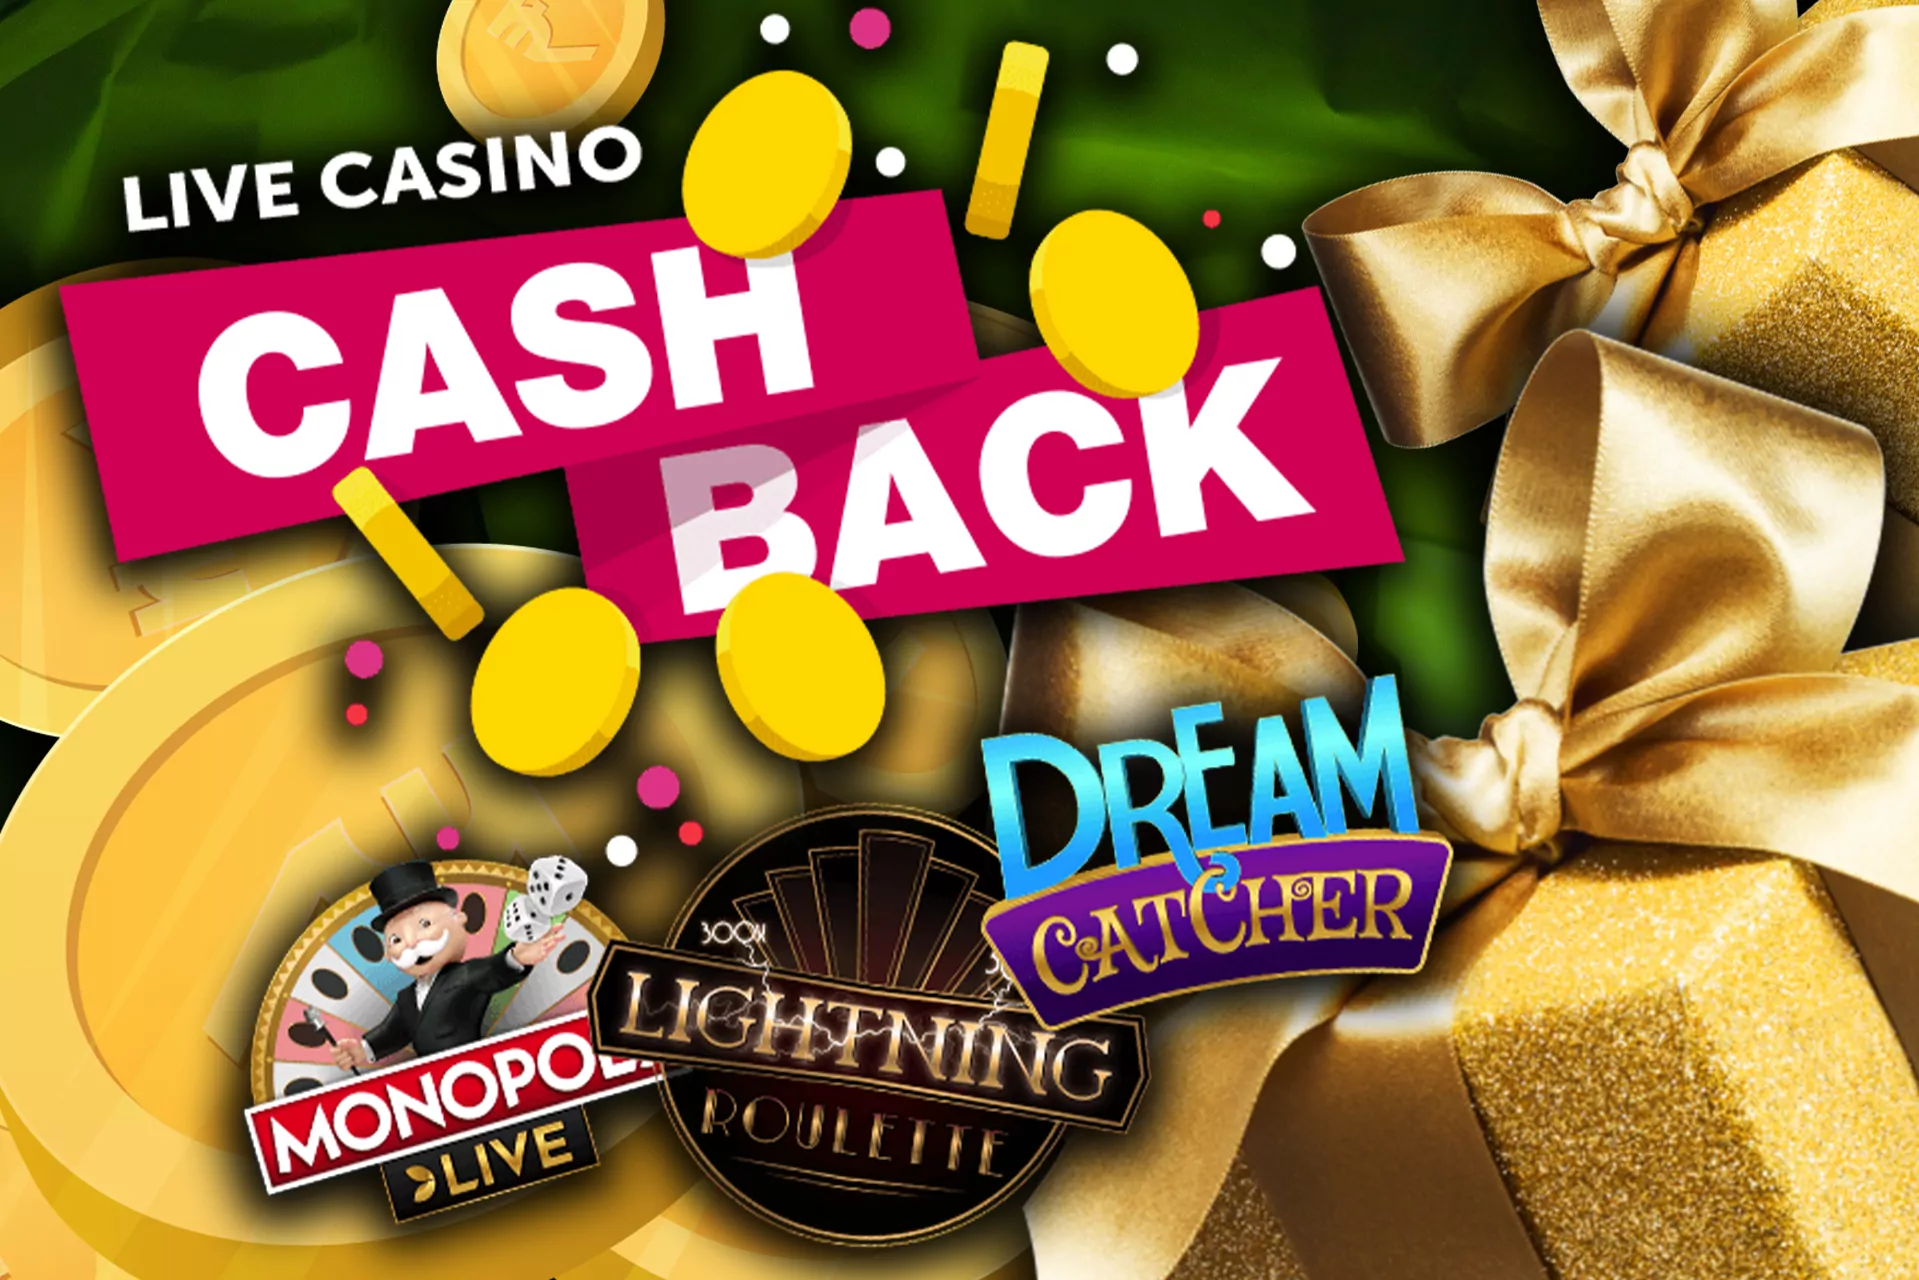 Play casino games and get a cashback.